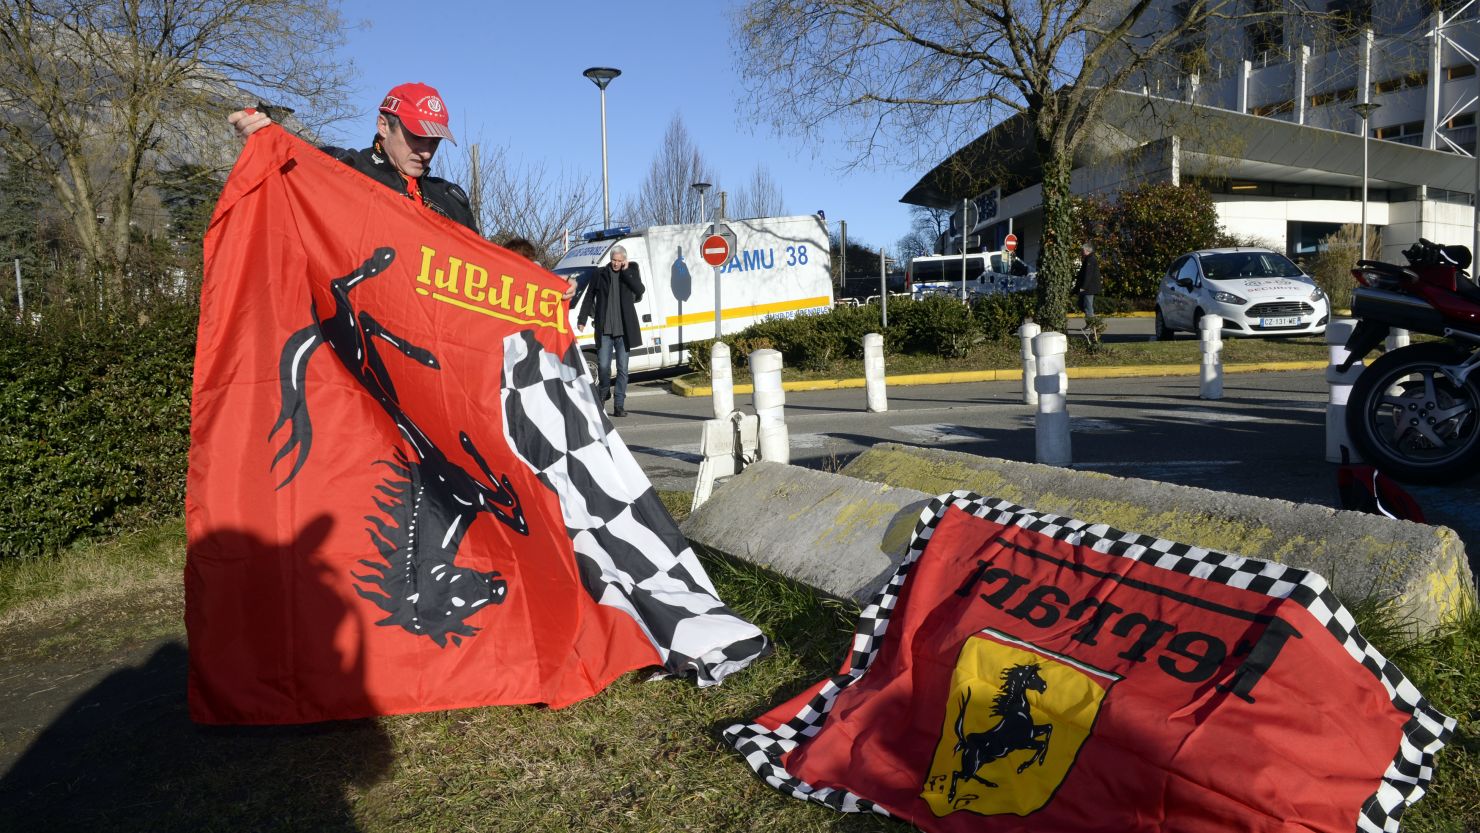 Fans have been showing their support for Michael Schumacher outside the Grenoble hospital where he is being treated.